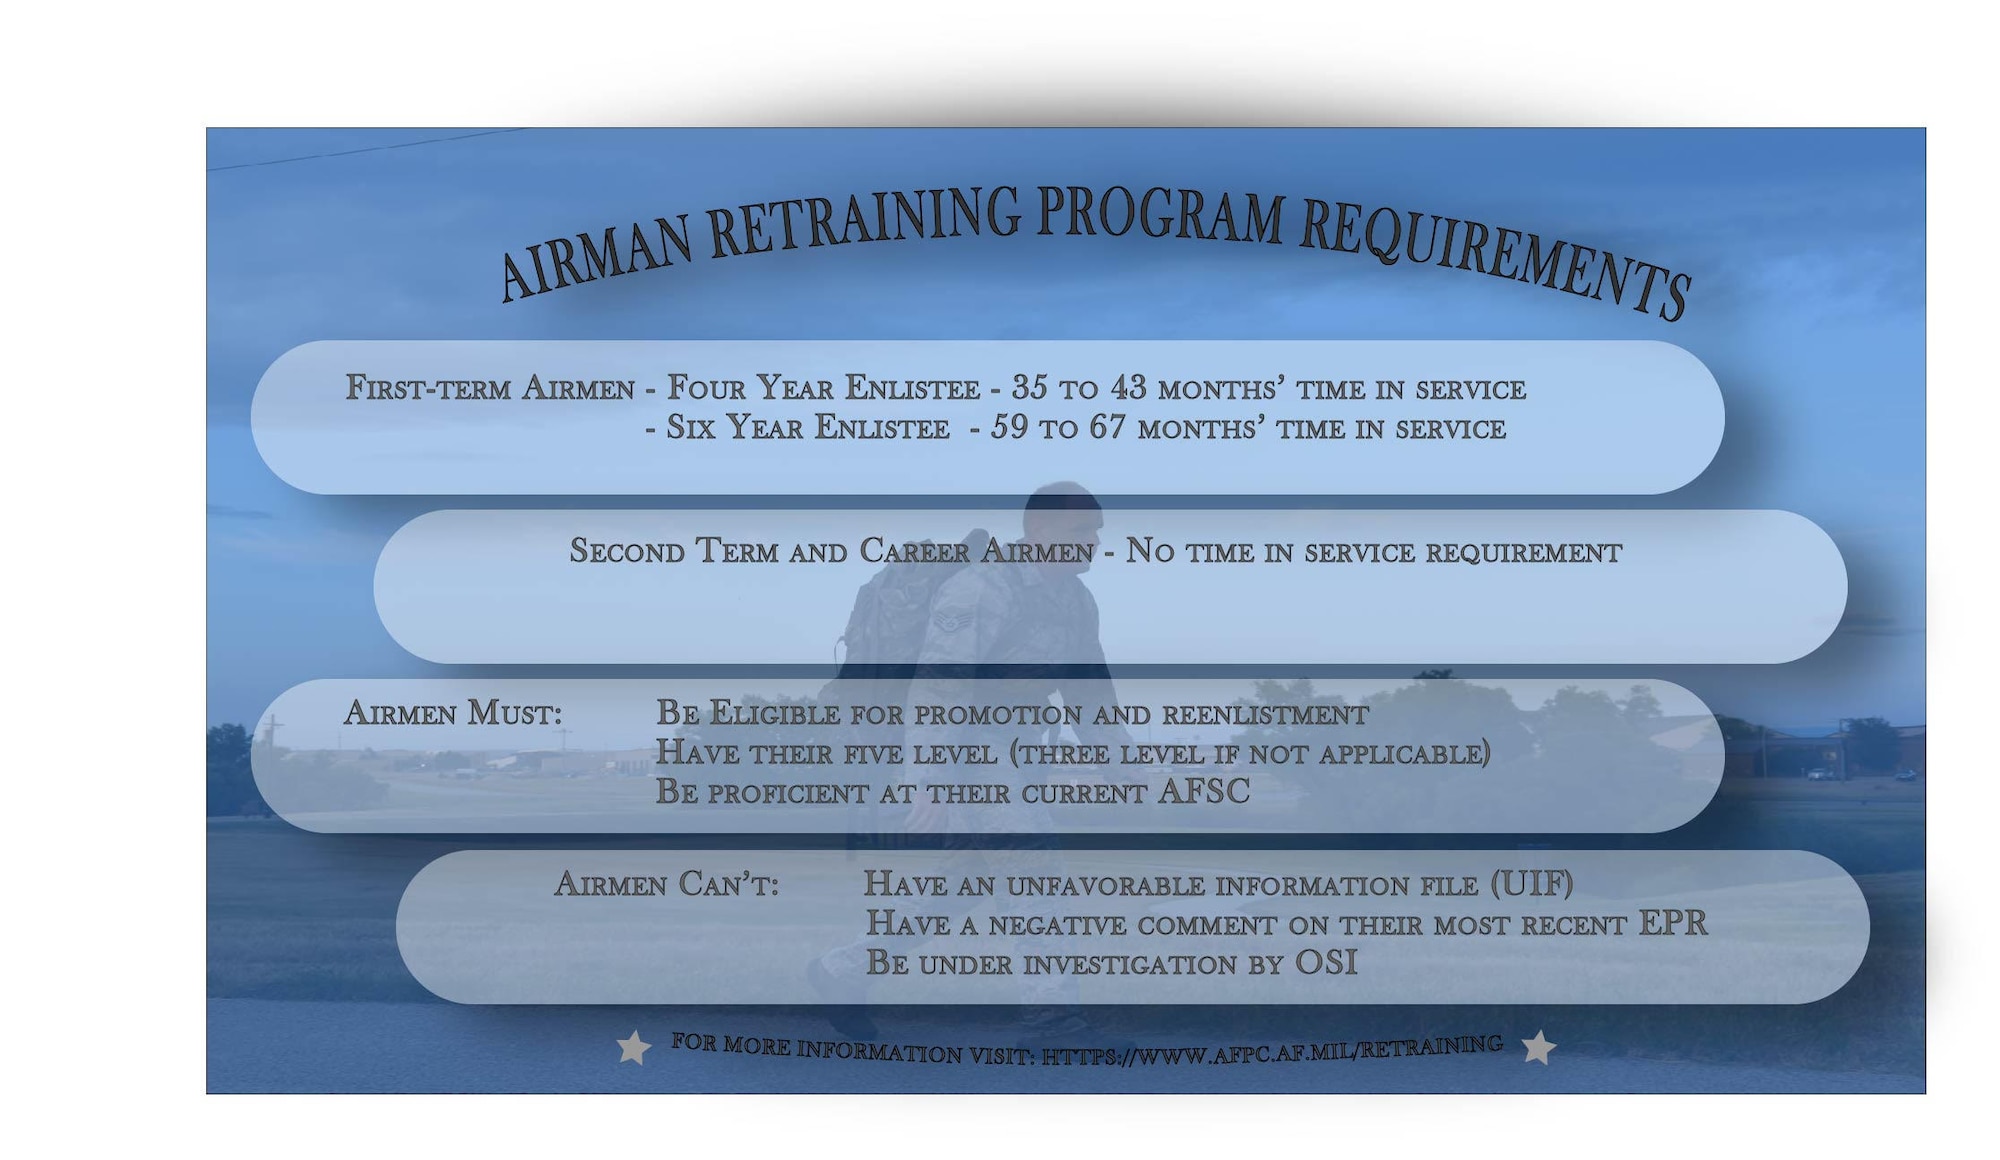 The Airman Retraining Program provides Airmen the opportunity to retrain from their current career fields to another. To find out more about the Air Force retraining program, Airmen are encouraged to visit the Air Force Personnel Center’s website. (U.S. Air Force graphic by Airman 1st Class Christina Bennett)